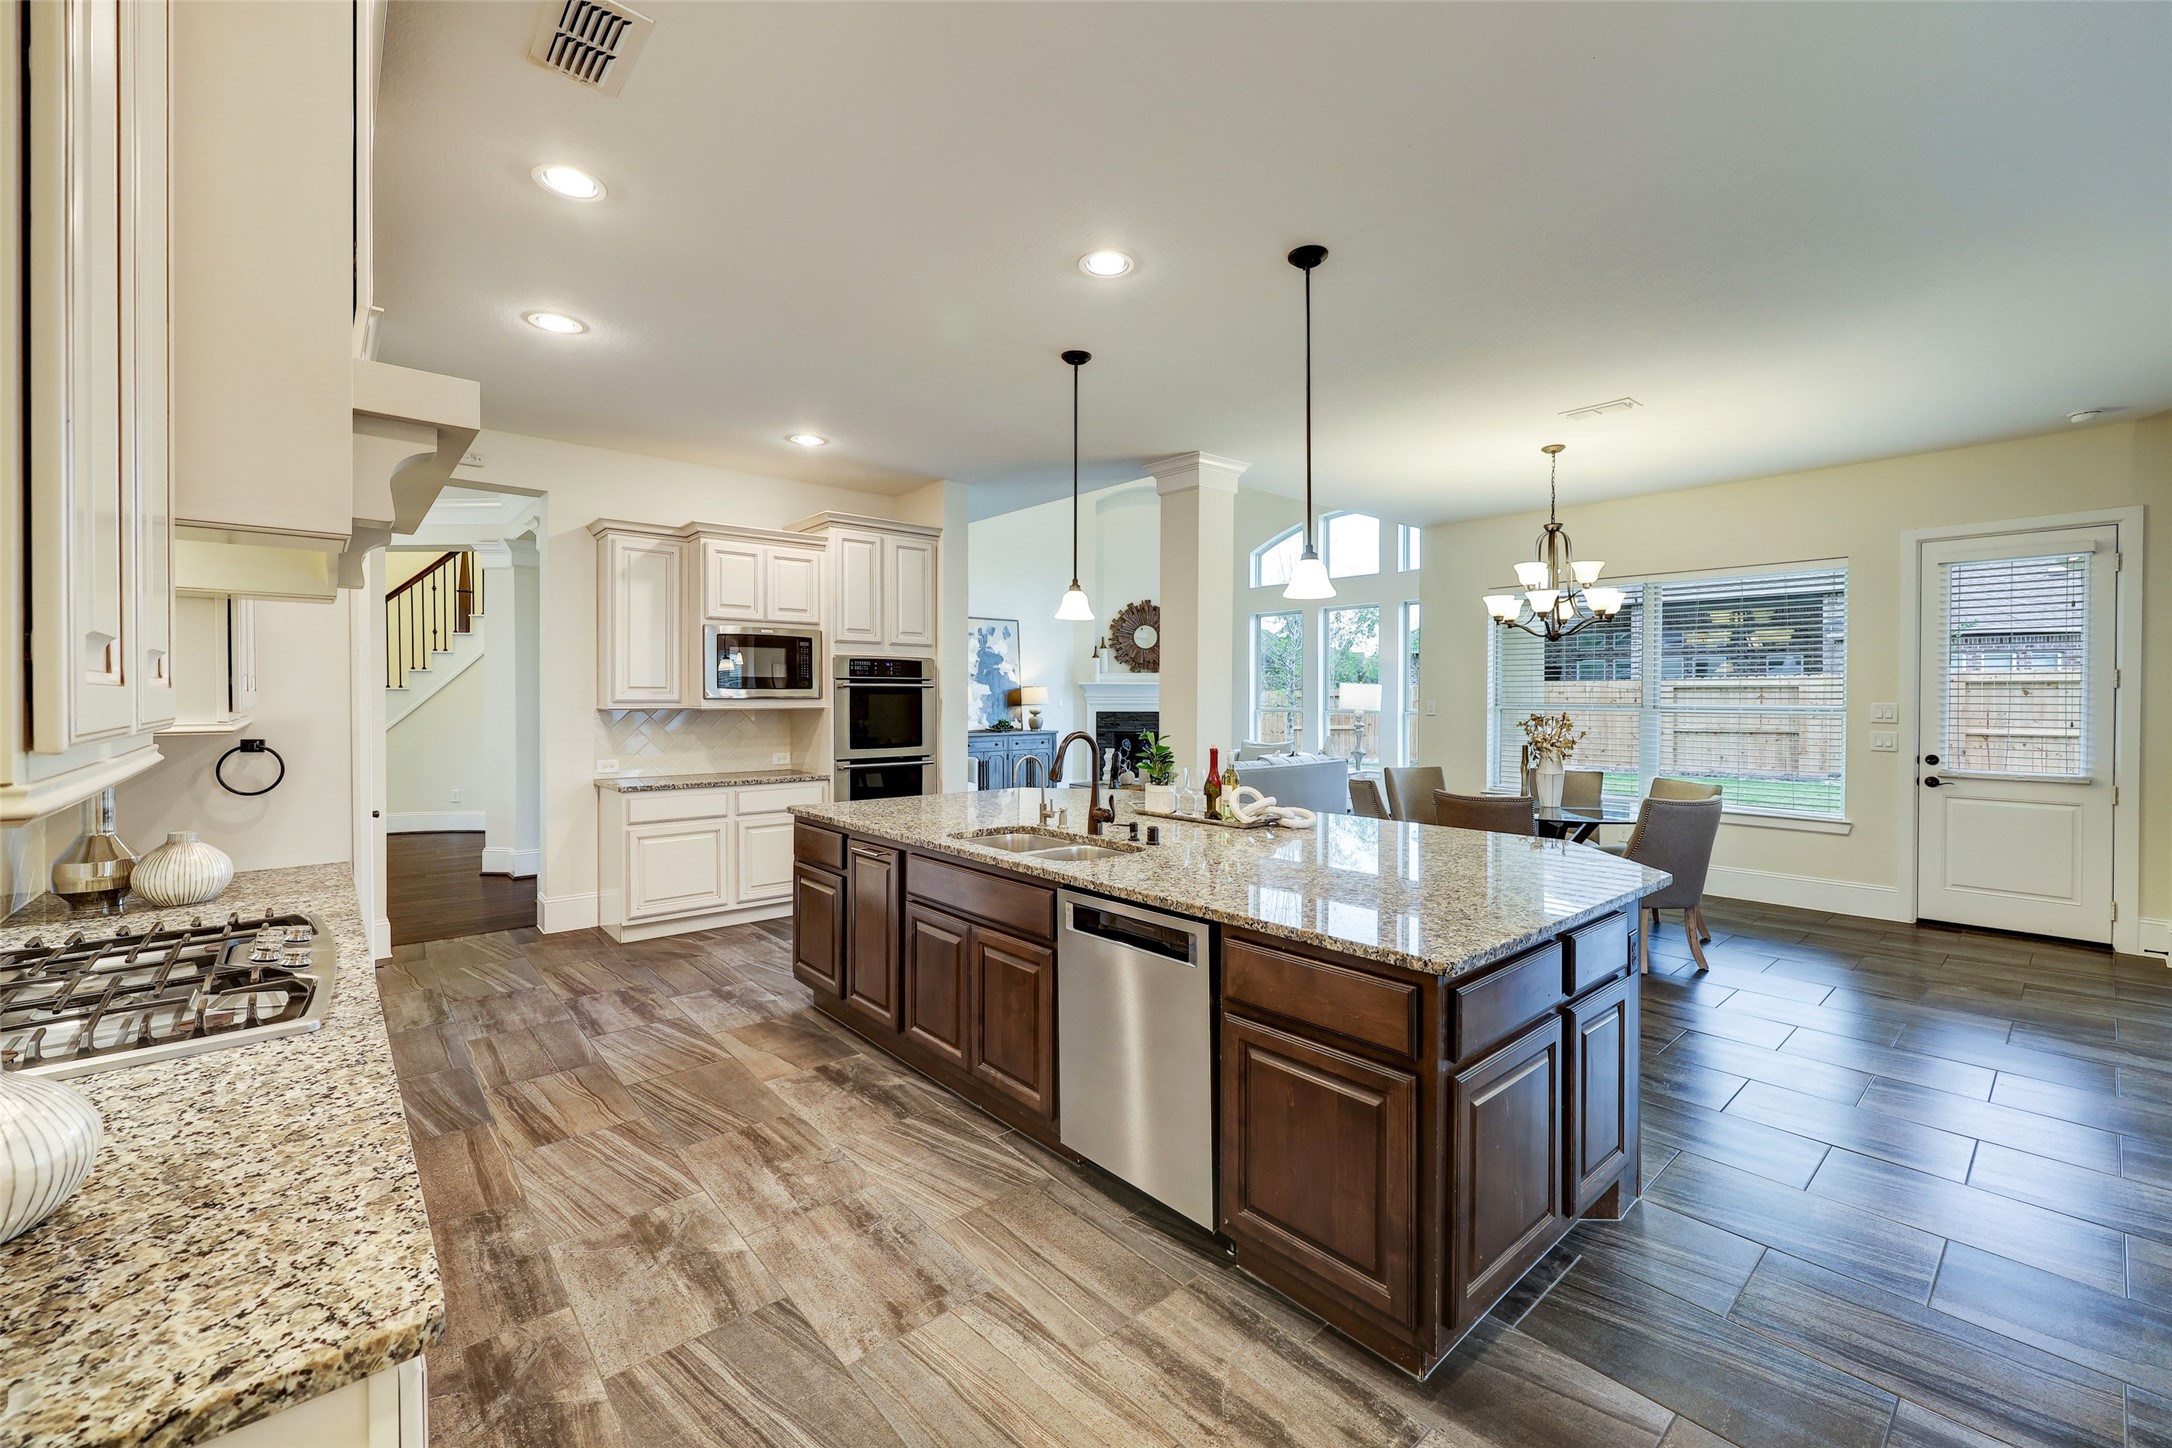 An additional angle of the kitchen peering into the family room and breakfast area showcases the depth of this generous first floor layout. A second bedroom suite is to the right of the patio door.